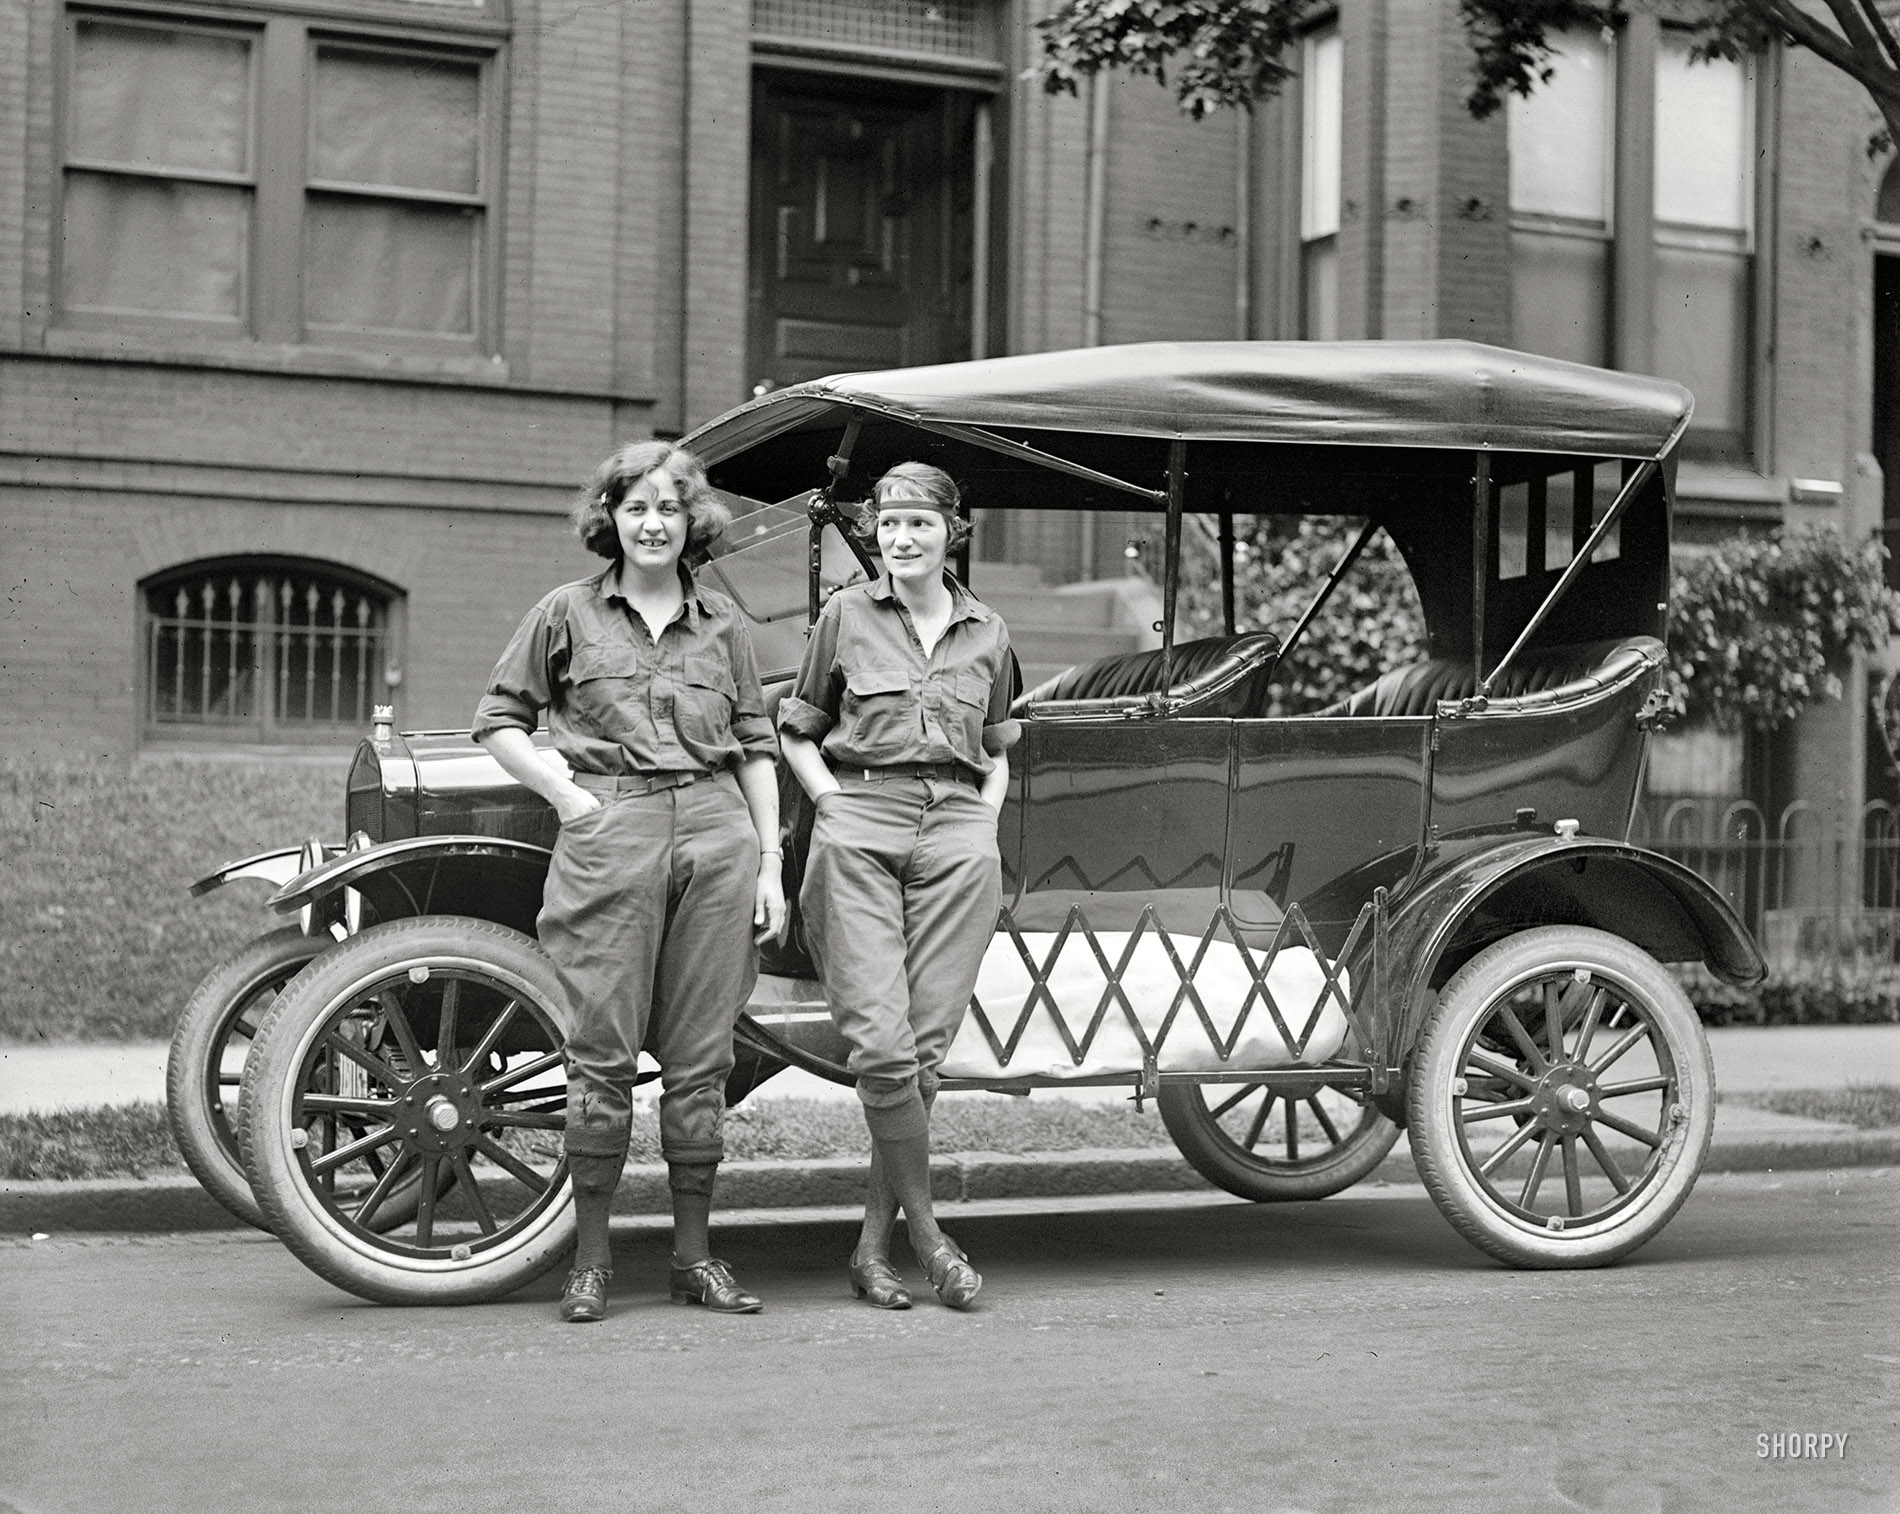 June 13, 1922. Washington, D.C. "Viola LaLonde and Elizabeth Van Tuyl." Also seen here. National Photo Company glass negative. View full size.